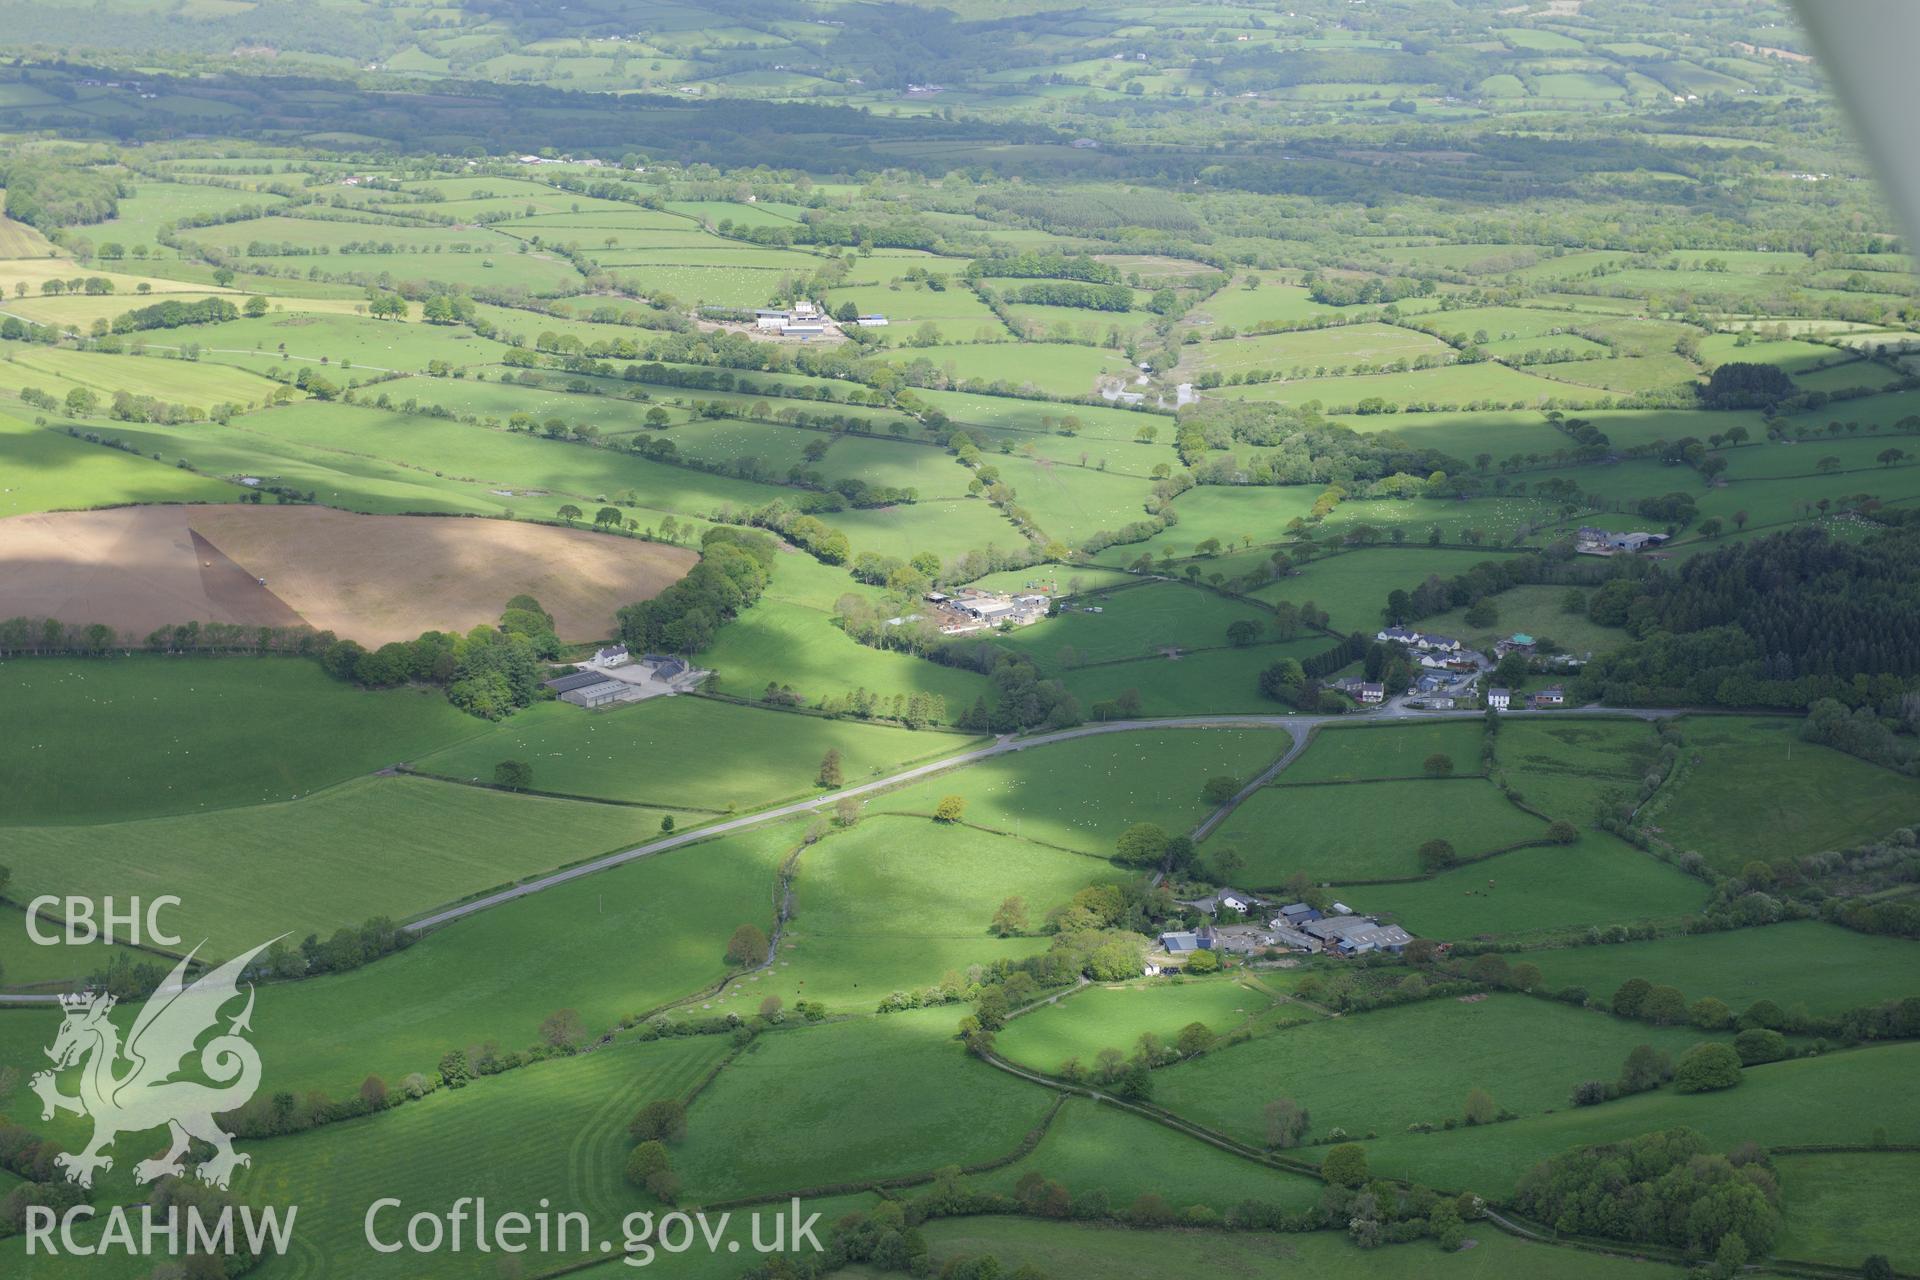 Landscape view of Teifi Valley including Olmarch hamlet and the old site of the Olmarch Railway Halt at Olmarch Fawr farm. Oblique aerial photograph taken during the Royal Commission's programme of archaeological aerial reconnaissance by Toby Driver on 3rd June 2015.